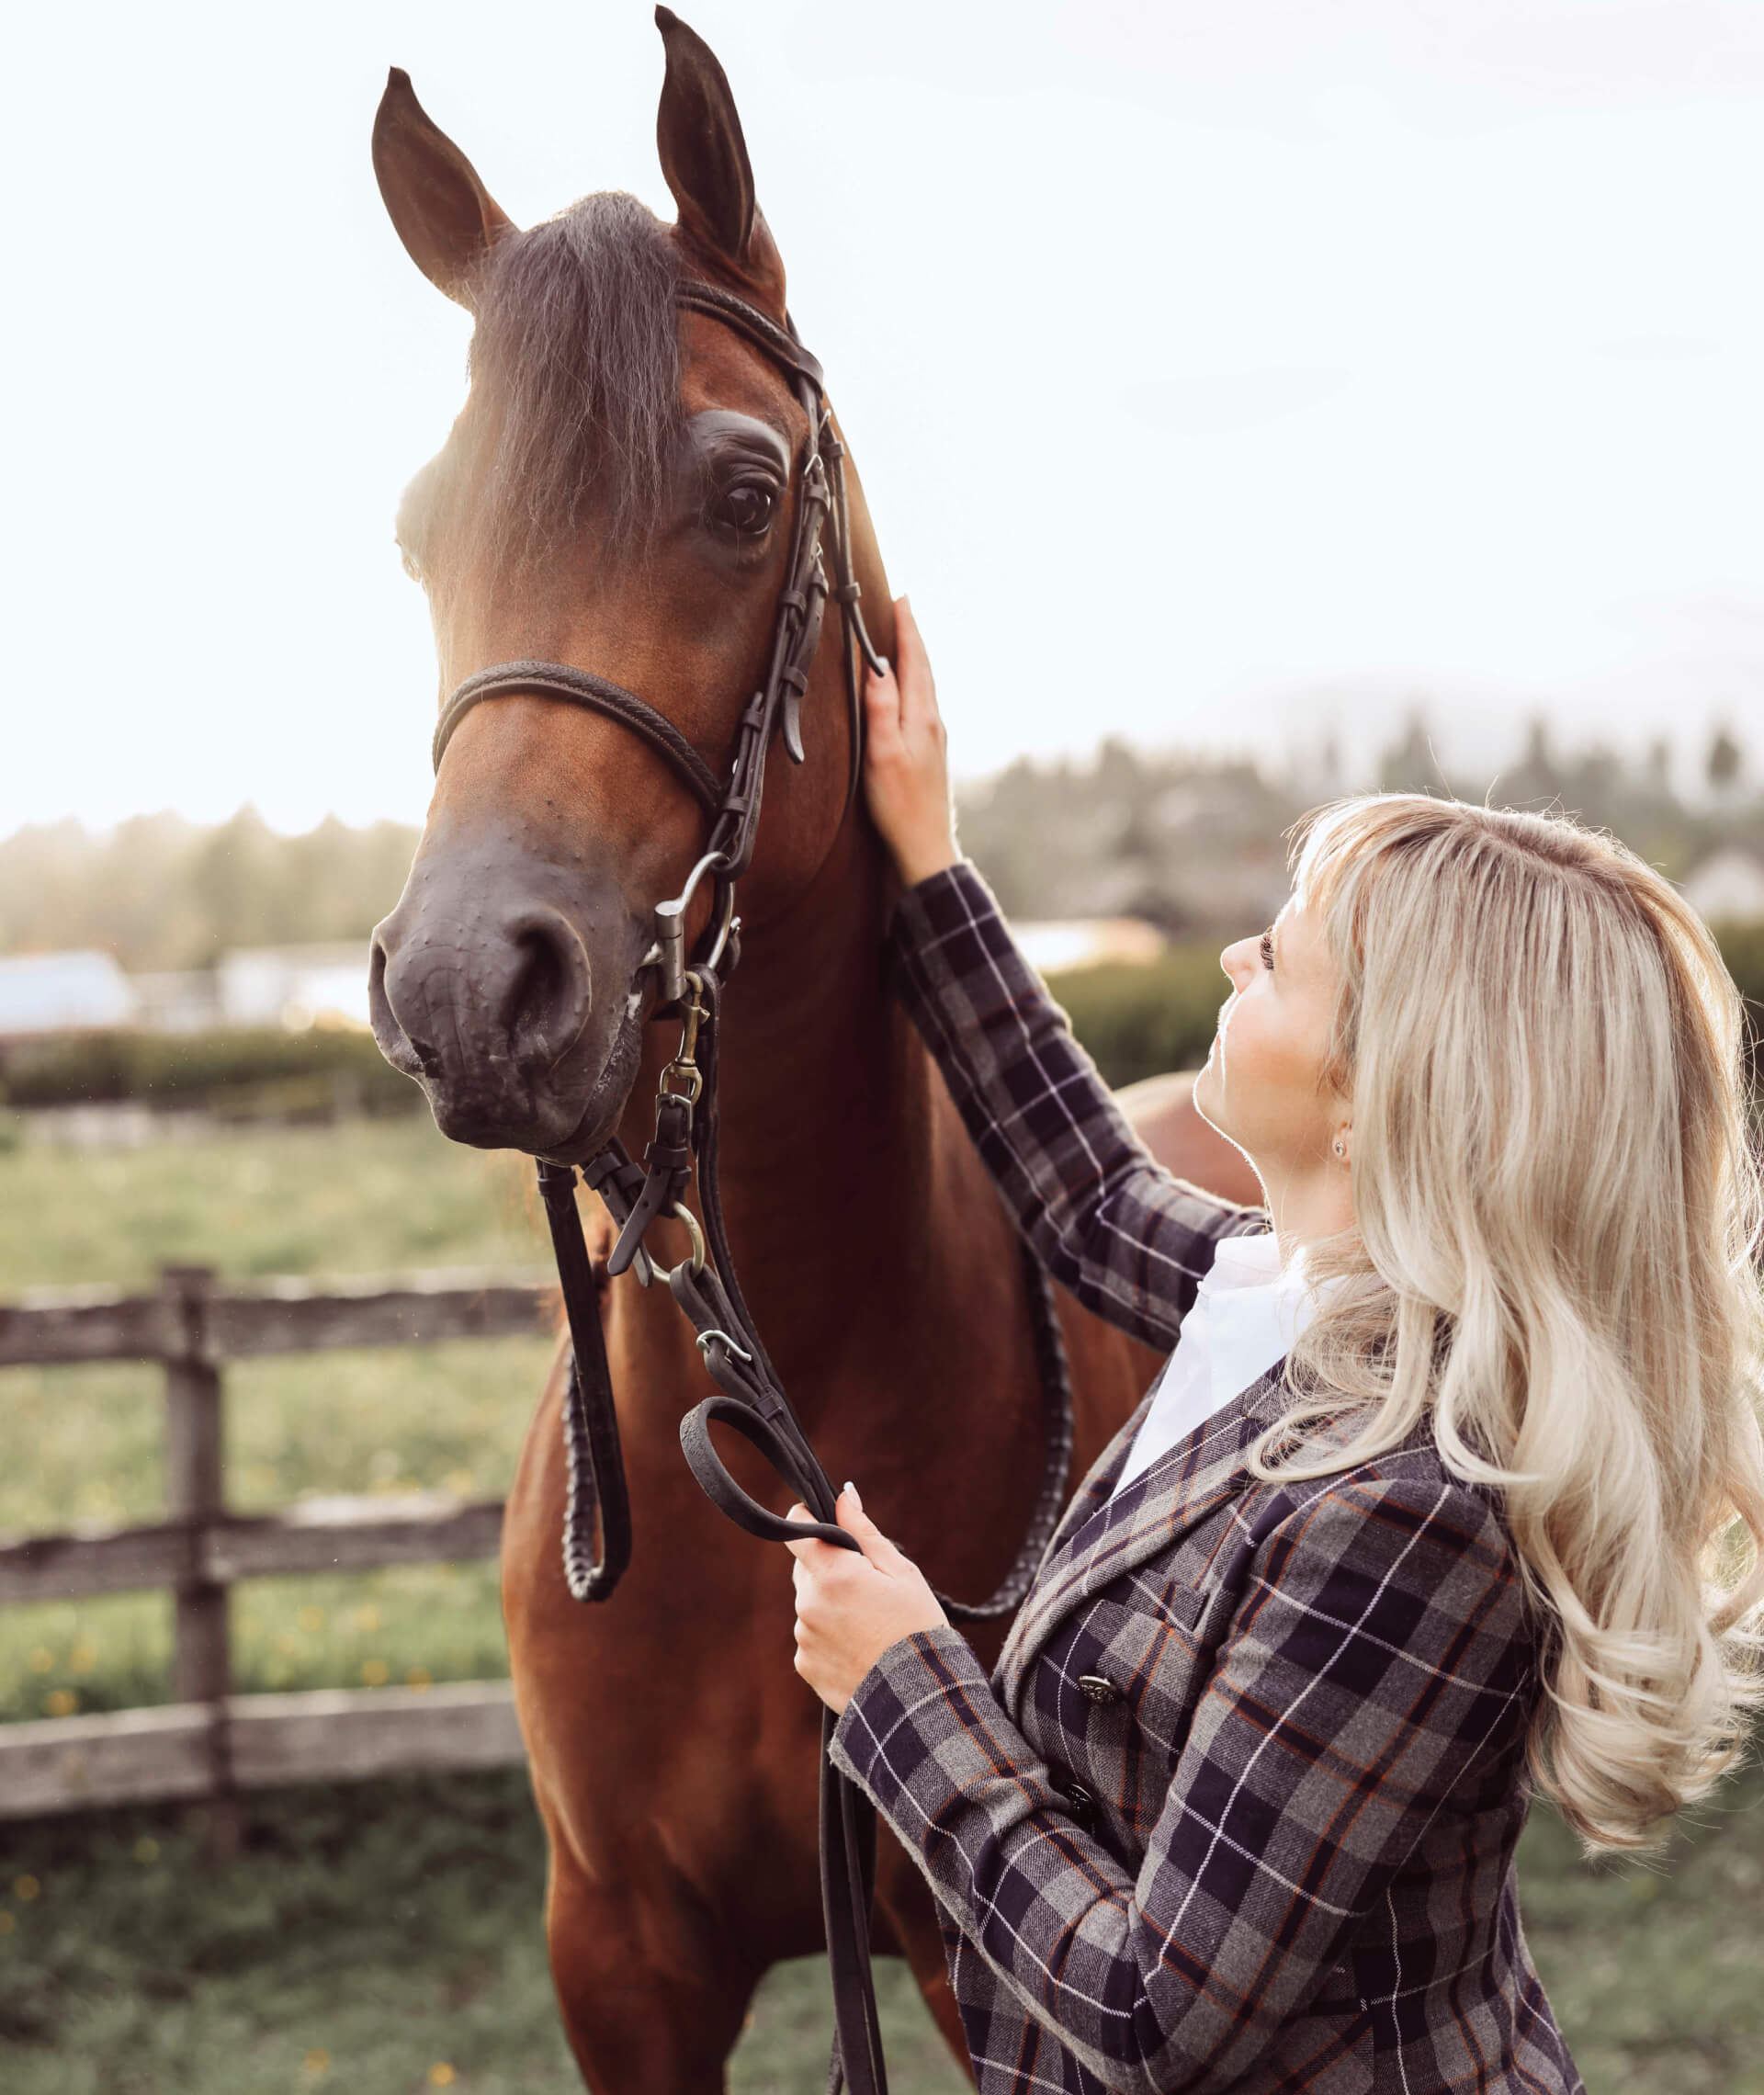 Polina with a horse